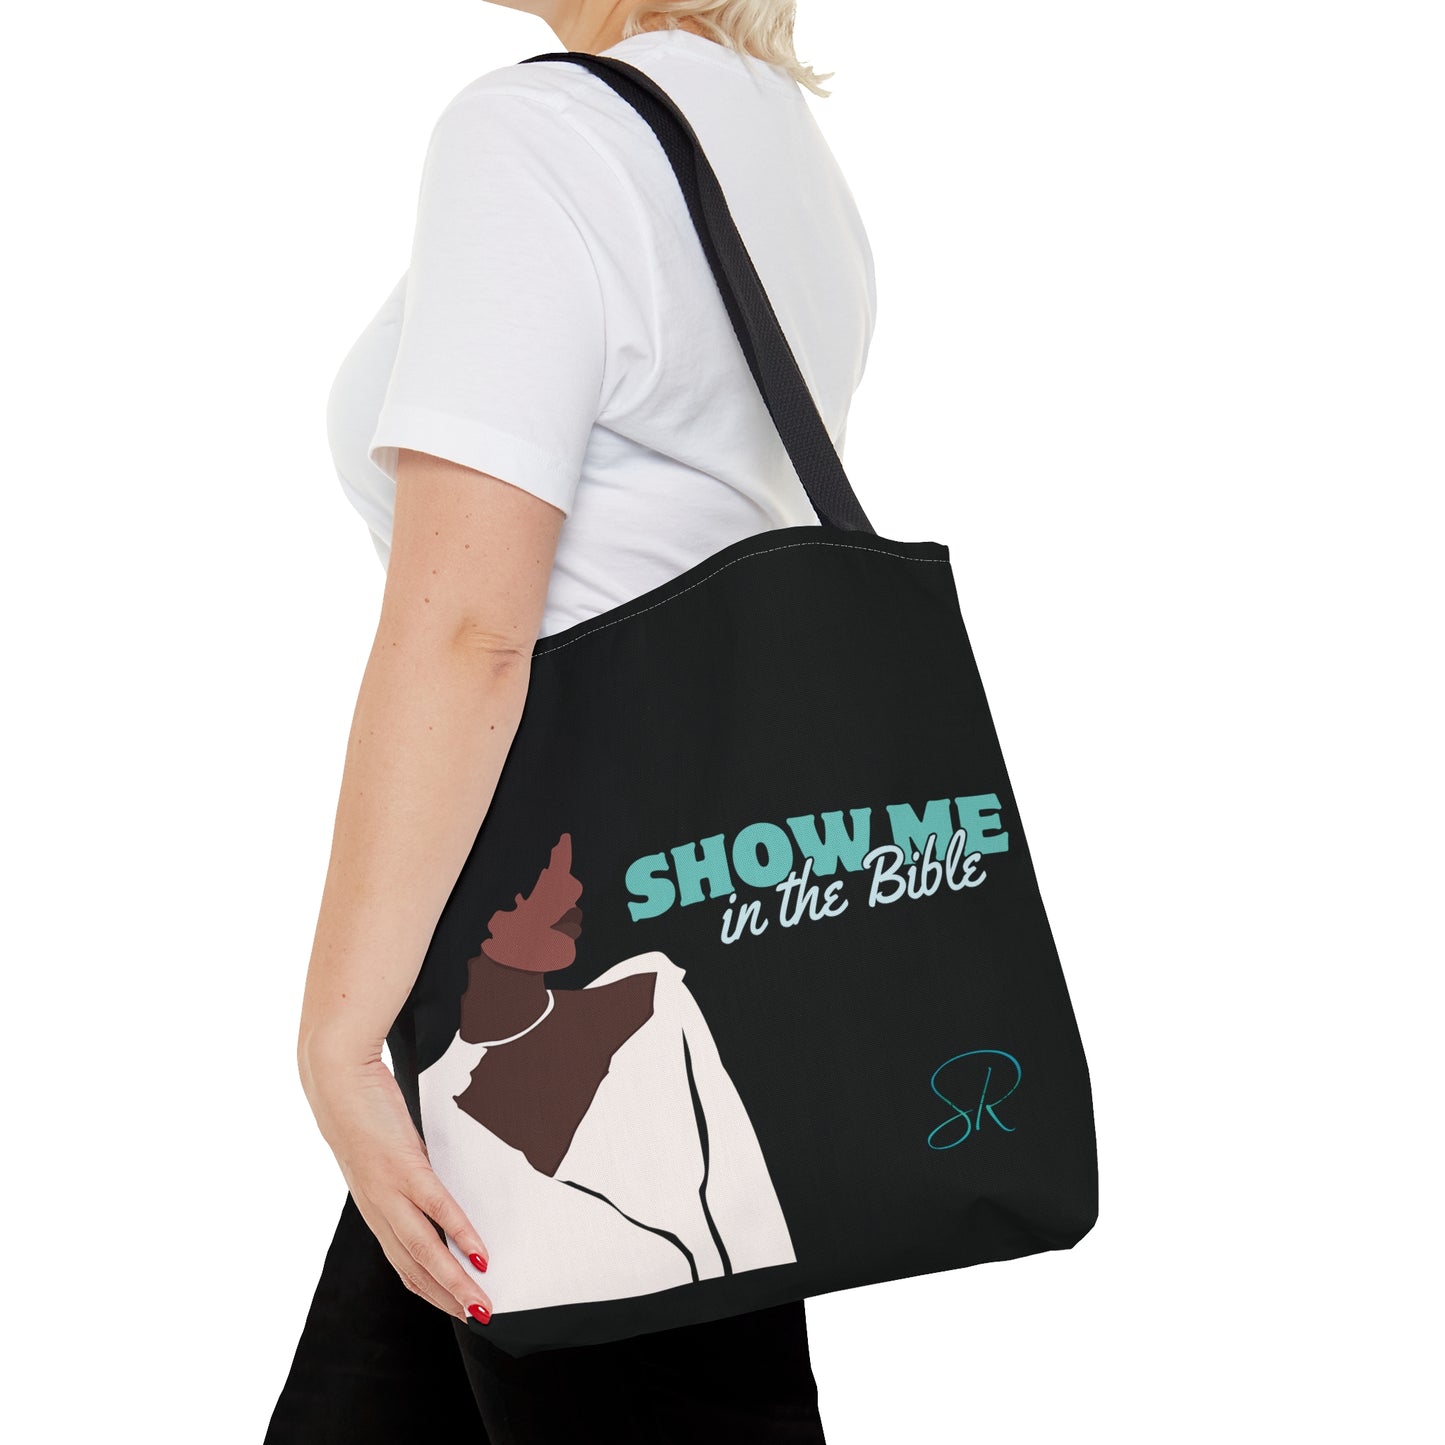 “Show Me in the Bible" Tote Bag